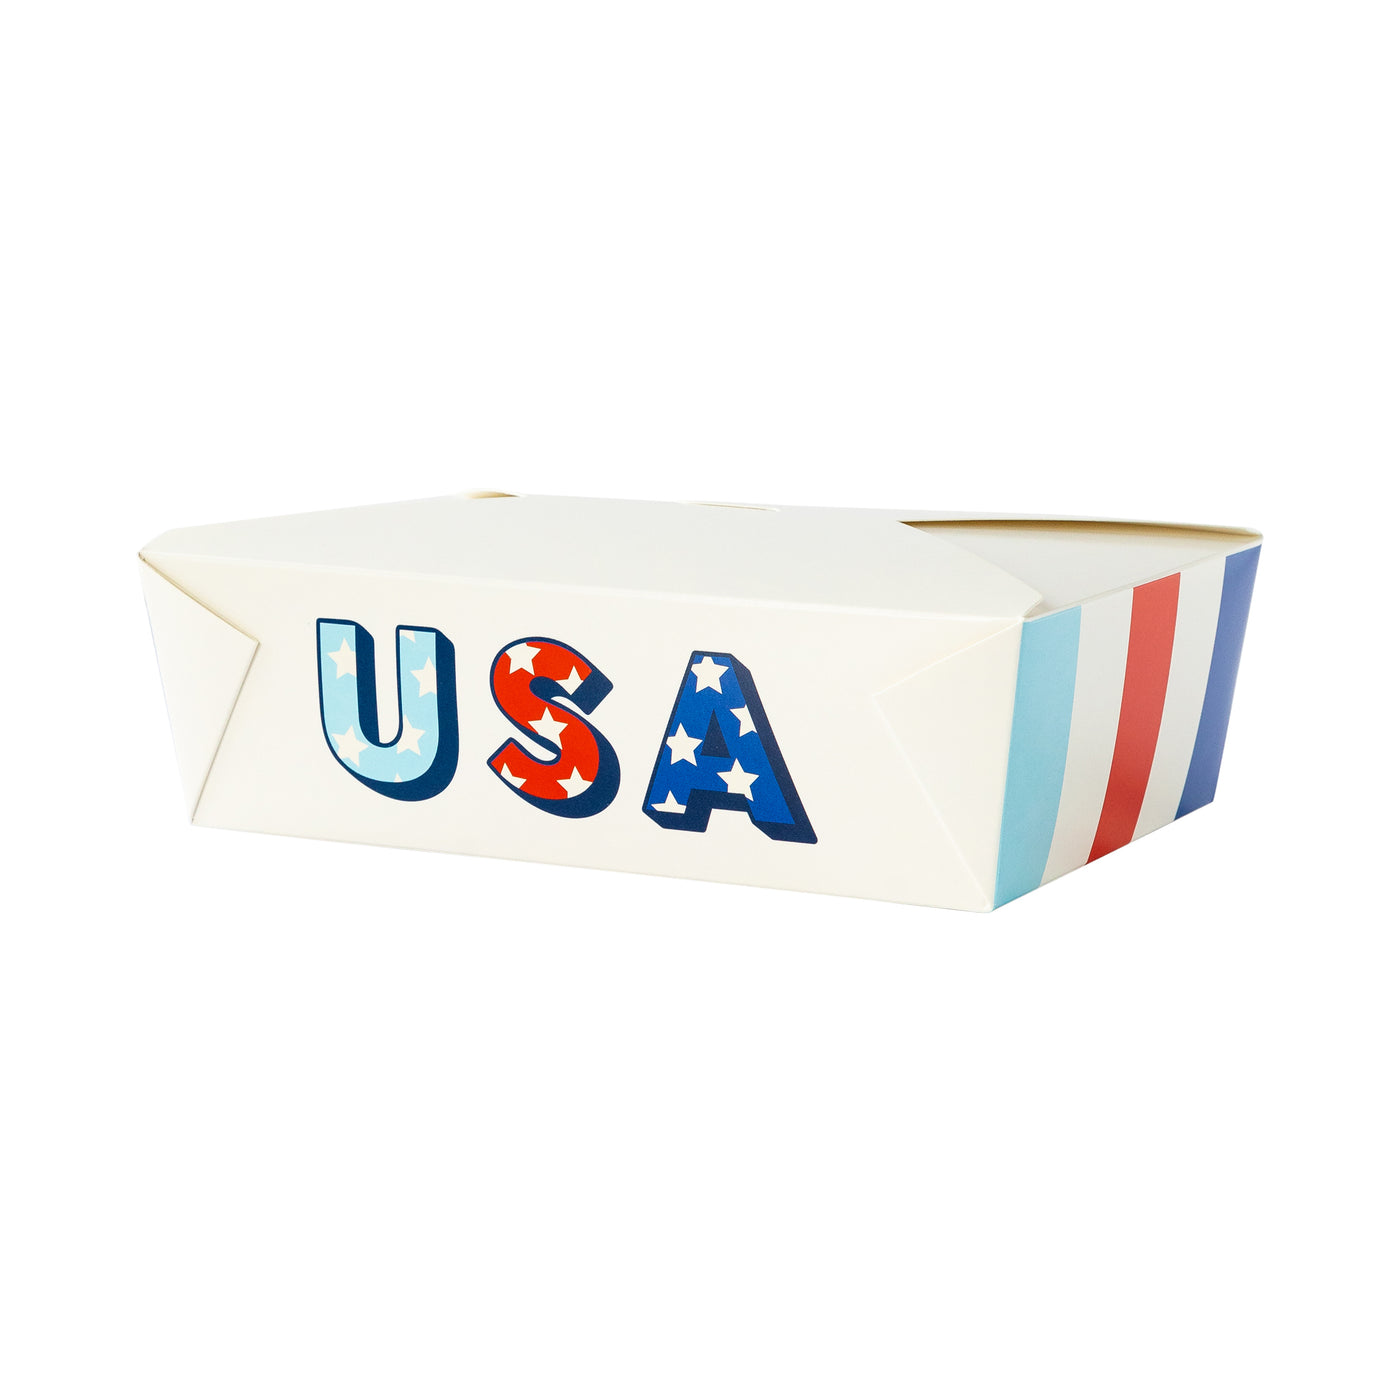 PLFB101 -  Worn USA To Go Boxes